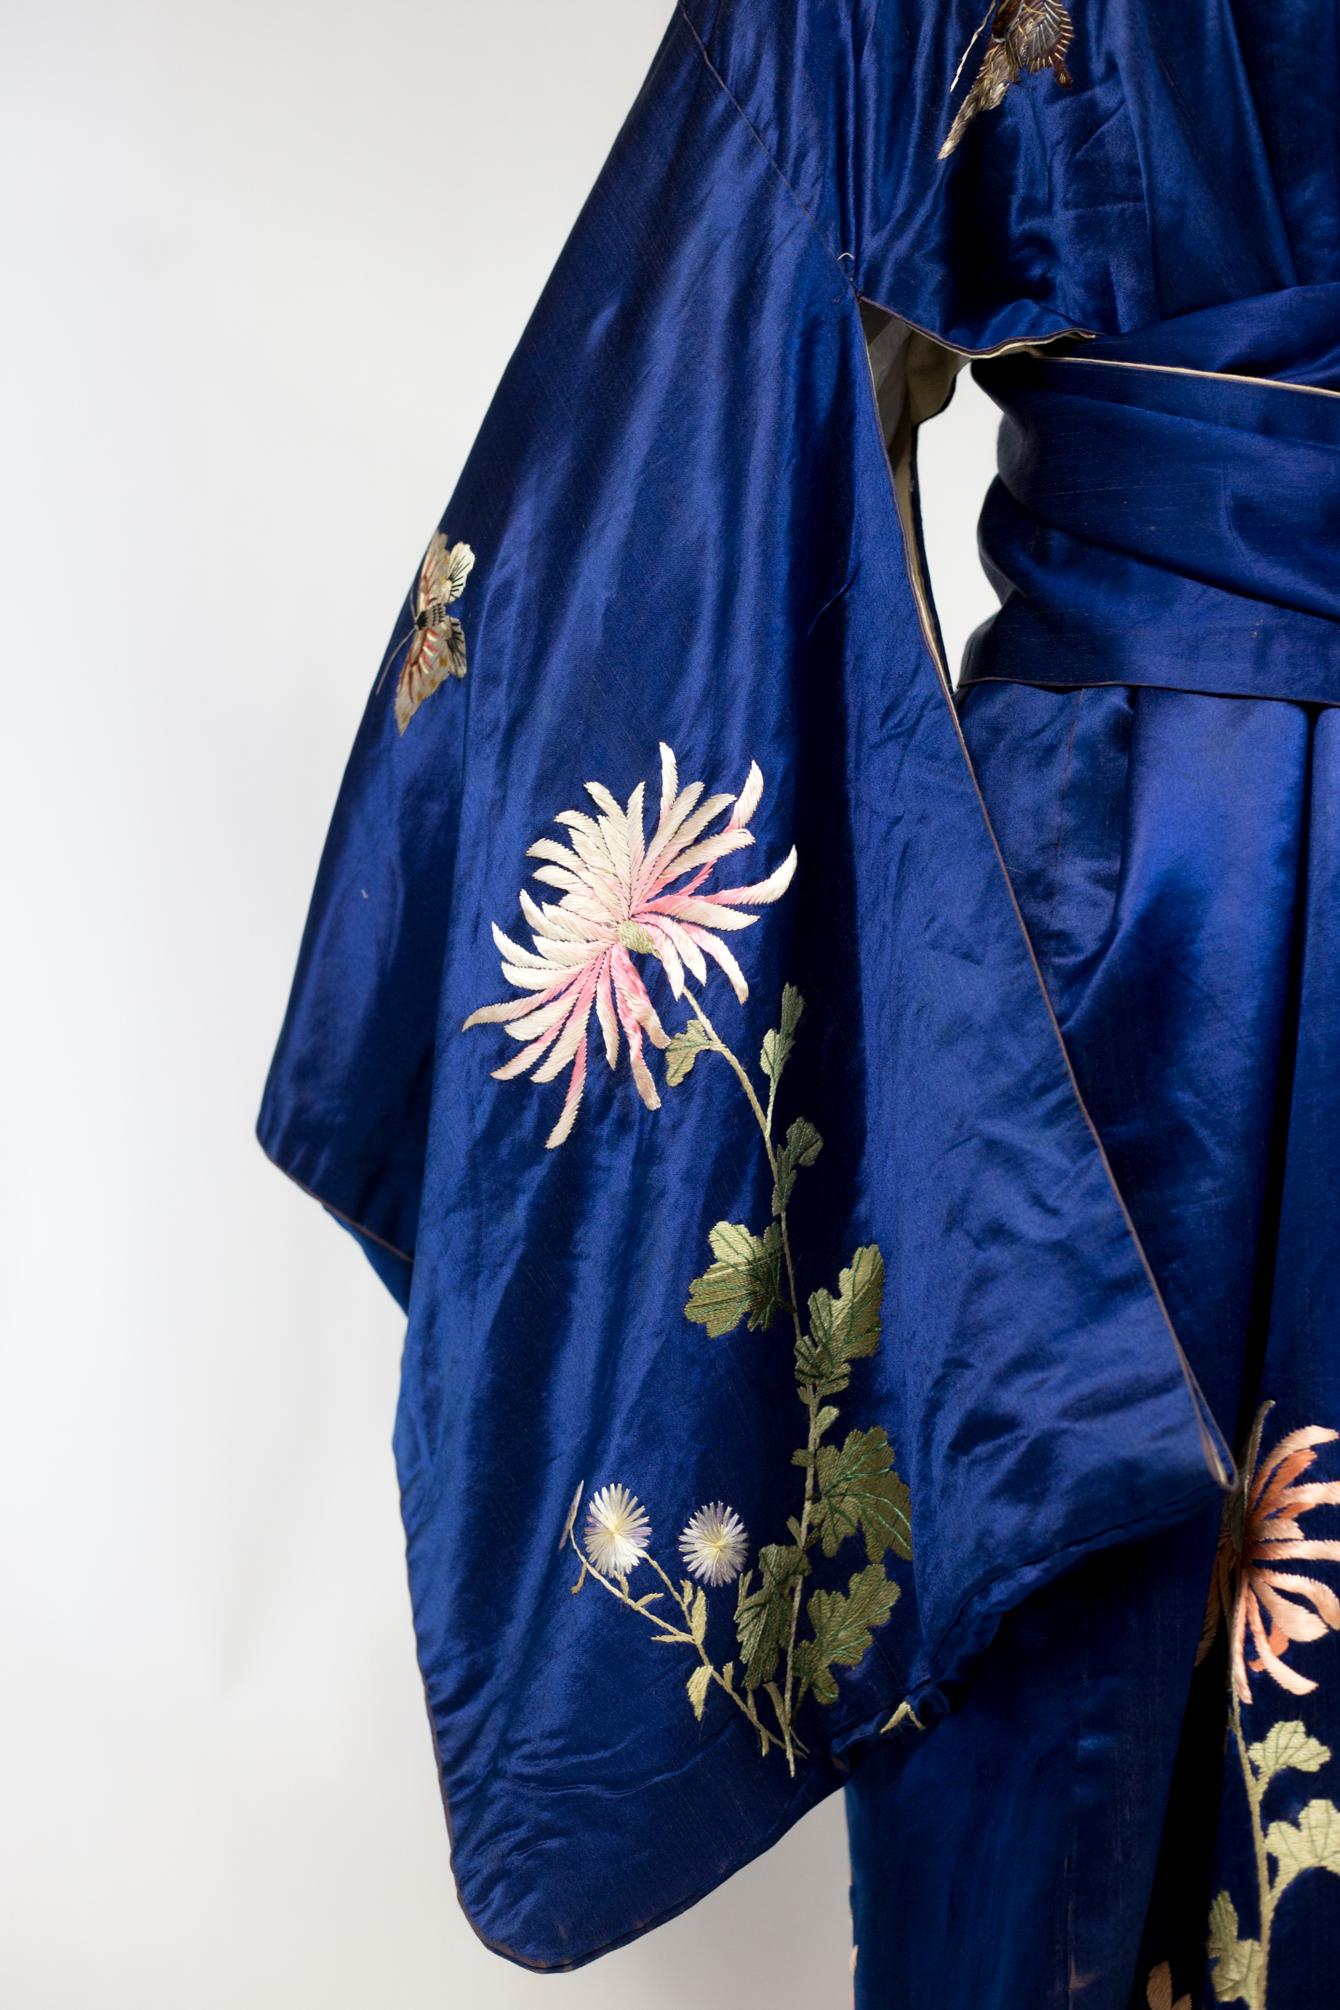 Circa 1920/1940

Japan

Beautiful Japanese party kimono in silk satin and embroidered electric blue soton. Beautiful embroidery with large chrysanthemum stems symbol of longevity, in a cameaieu of white, pink and pale green, dotted with large